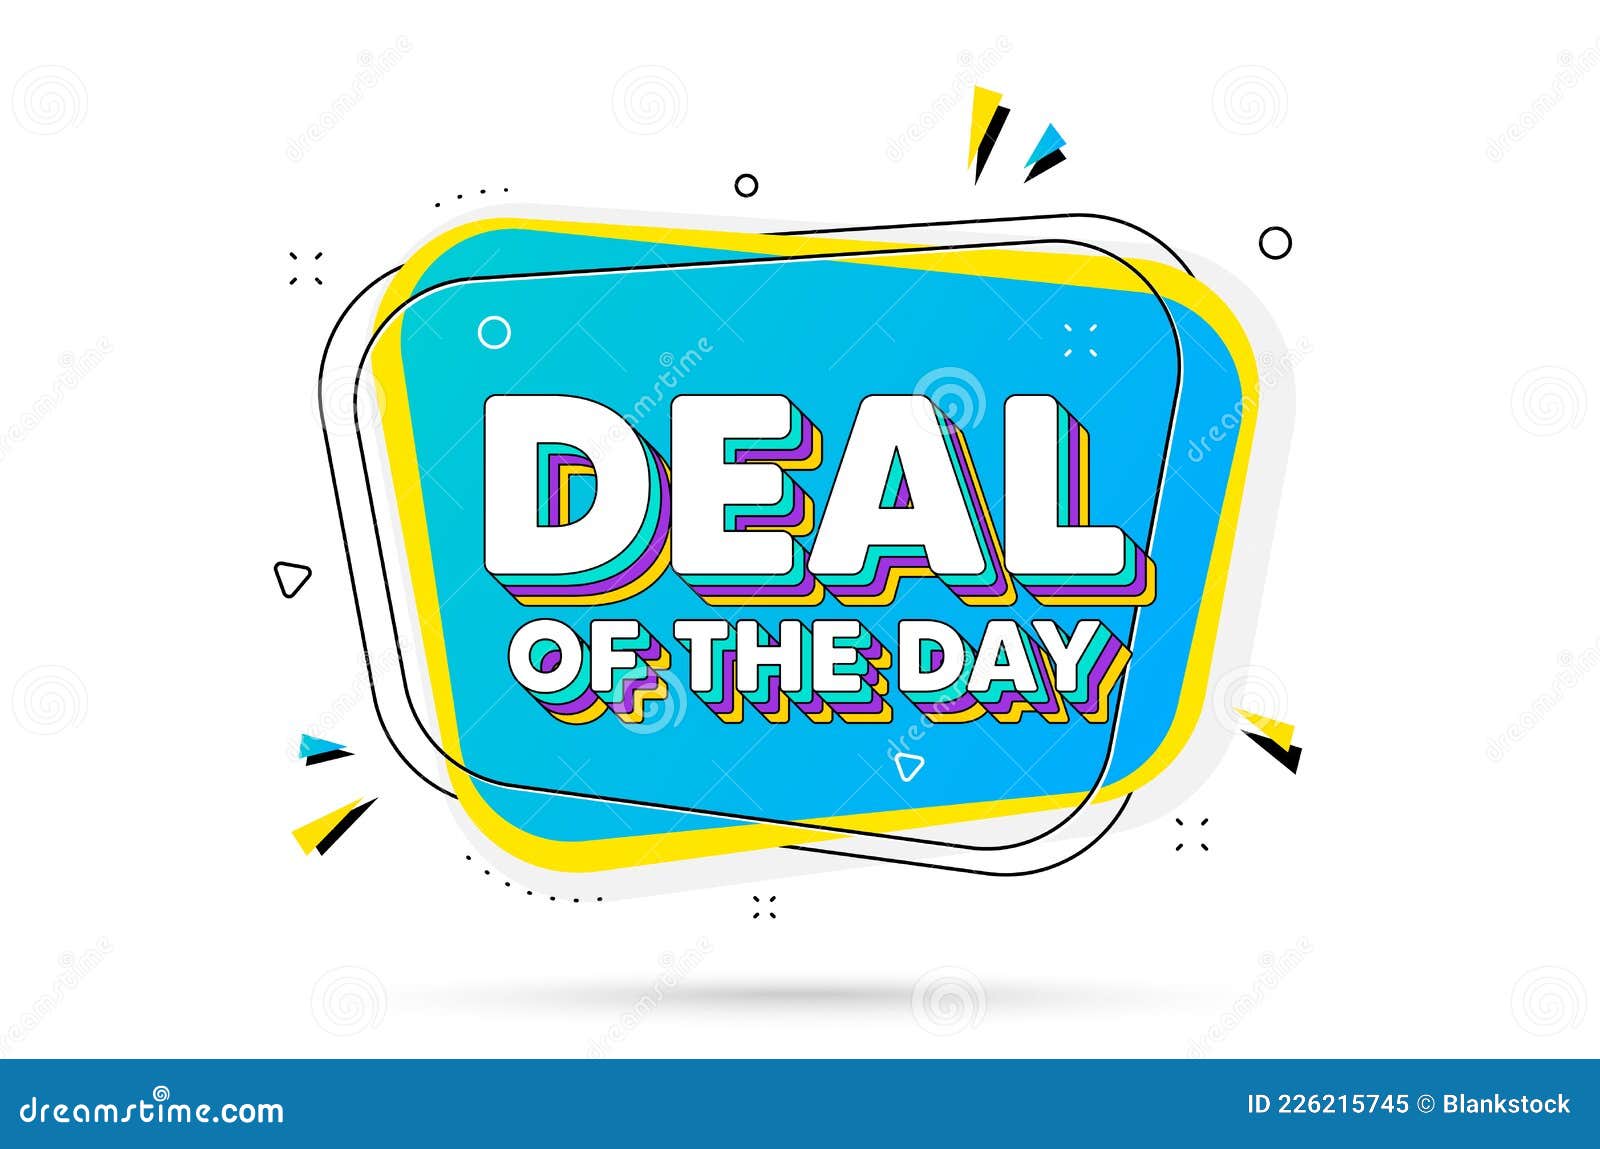 https://thumbs.dreamstime.com/z/deal-day-text-special-offer-price-sign-vector-chat-bubble-layered-advertising-discounts-symbol-minimal-talk-dialogue-226215745.jpg